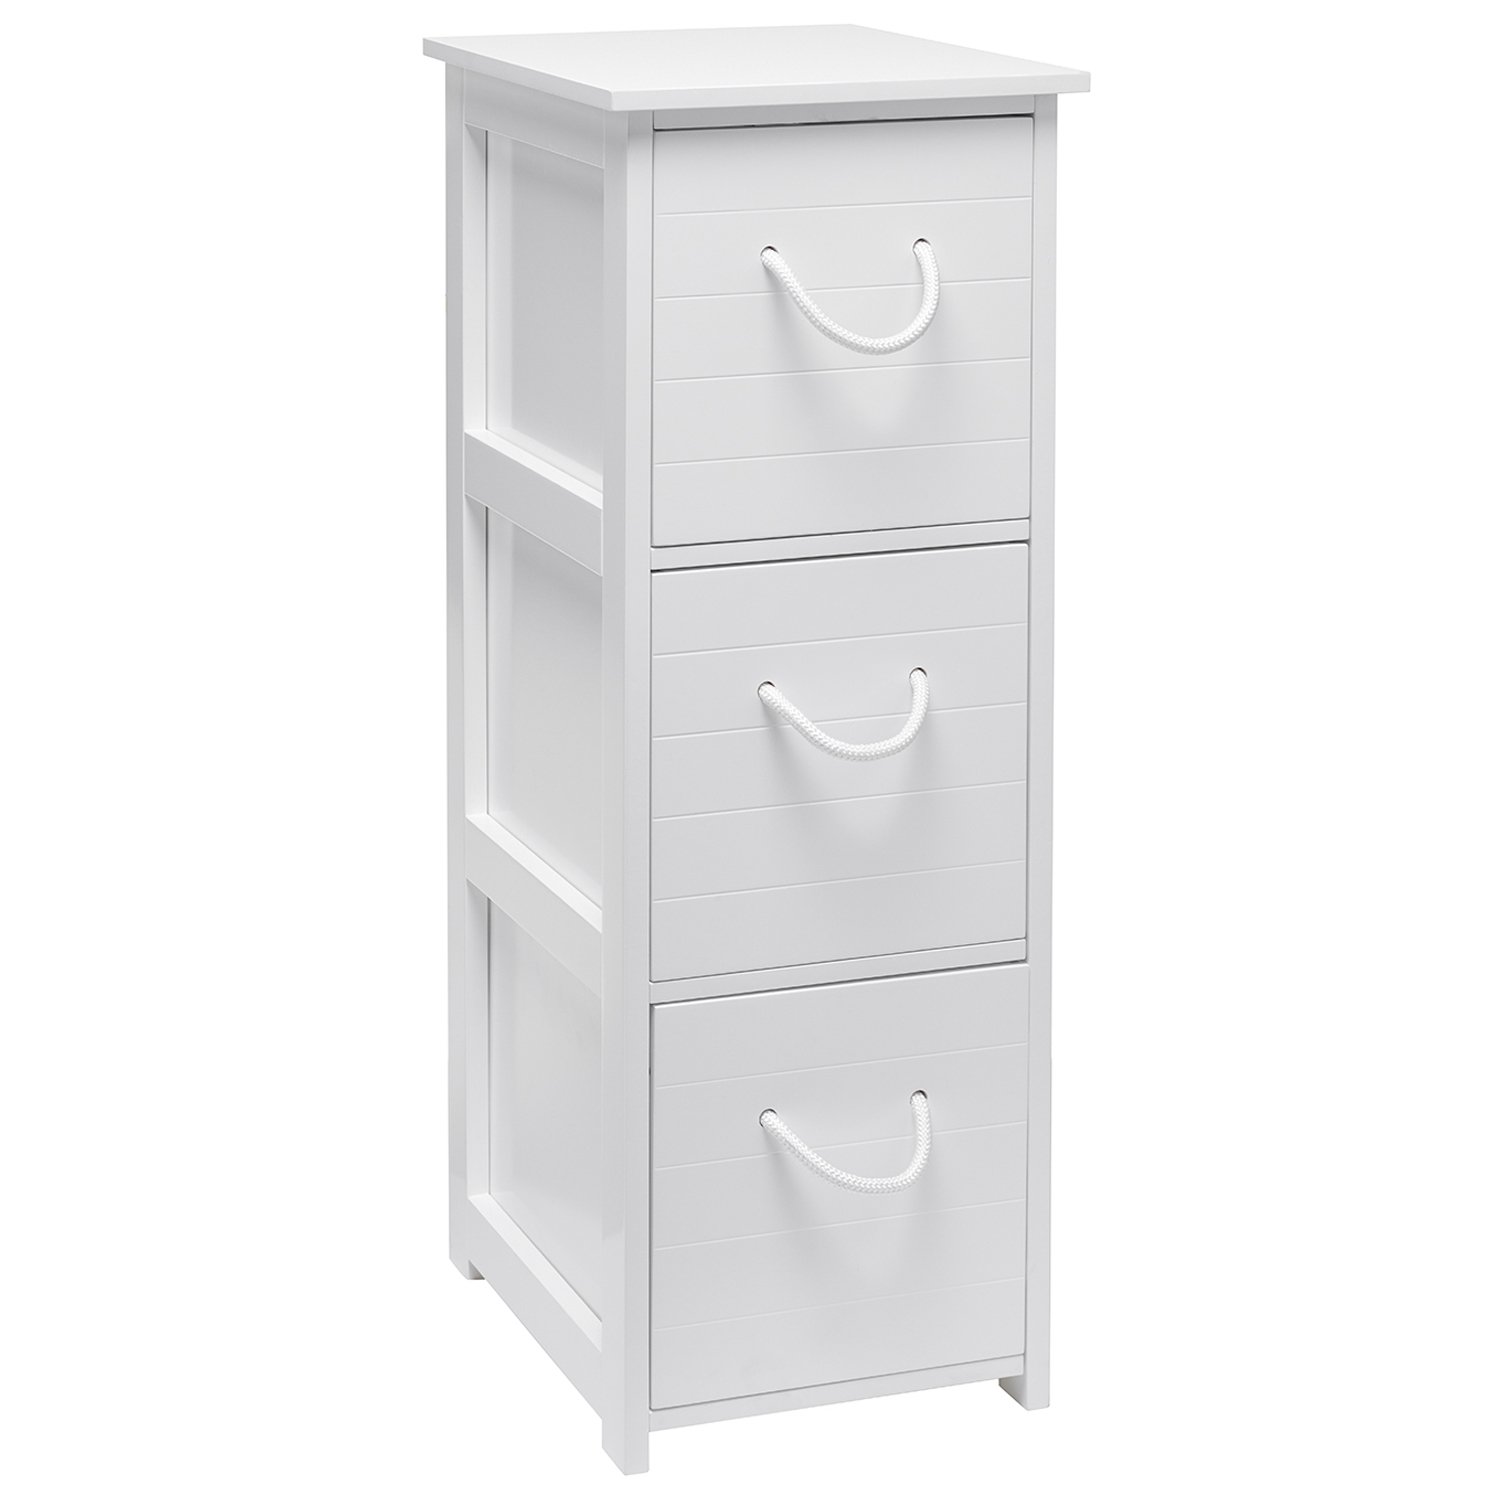 Aura 3 Drawer White Cabinet with Rope Handles Image 1